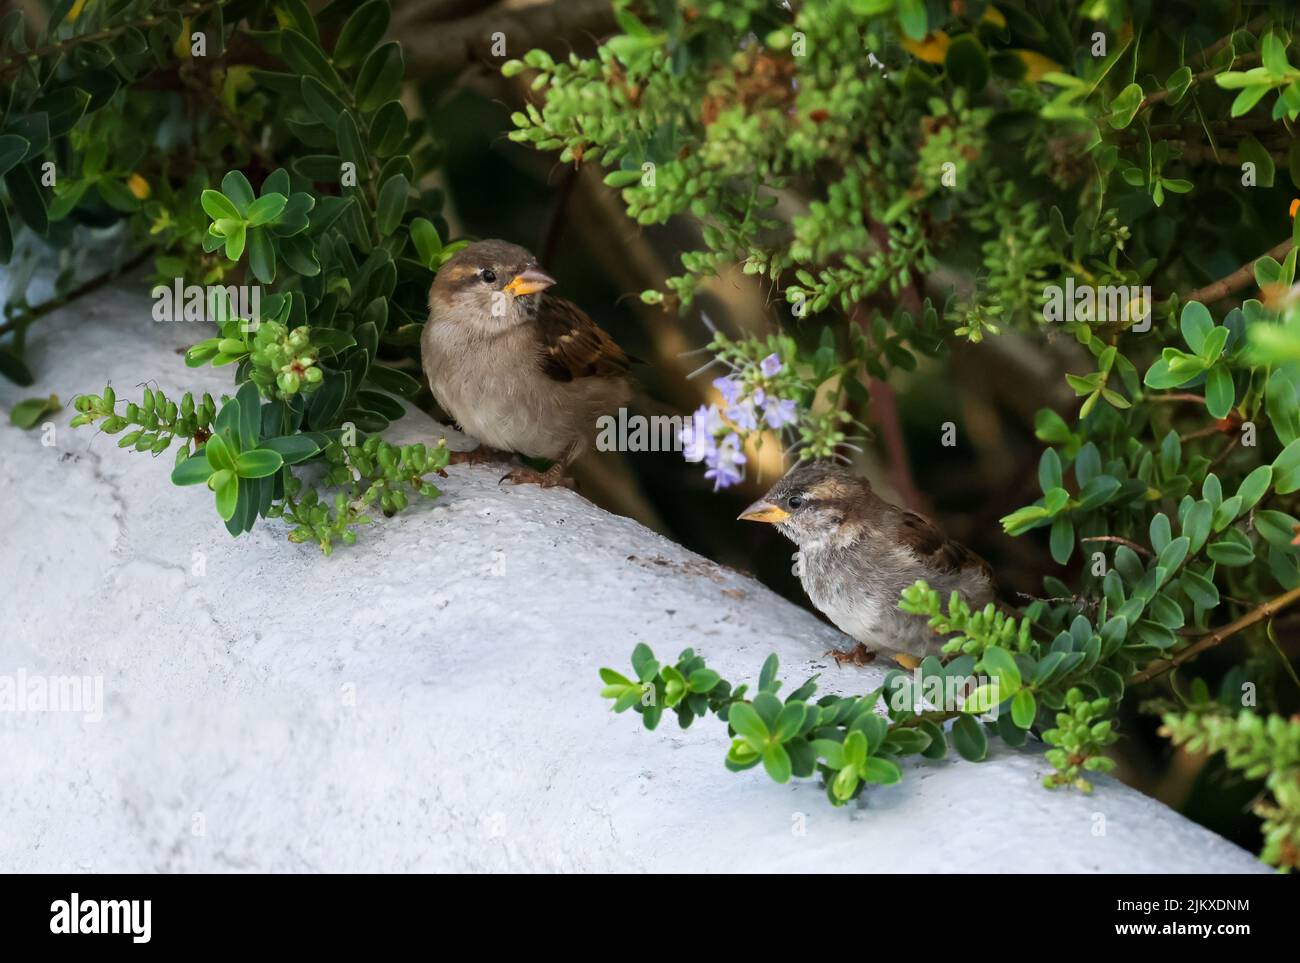 Two House sparrow chicks 'Passer domesticus' sitting on wall beneath green shrub. Young fledgling birds with yellow beak. Dublin, Ireland Stock Photo